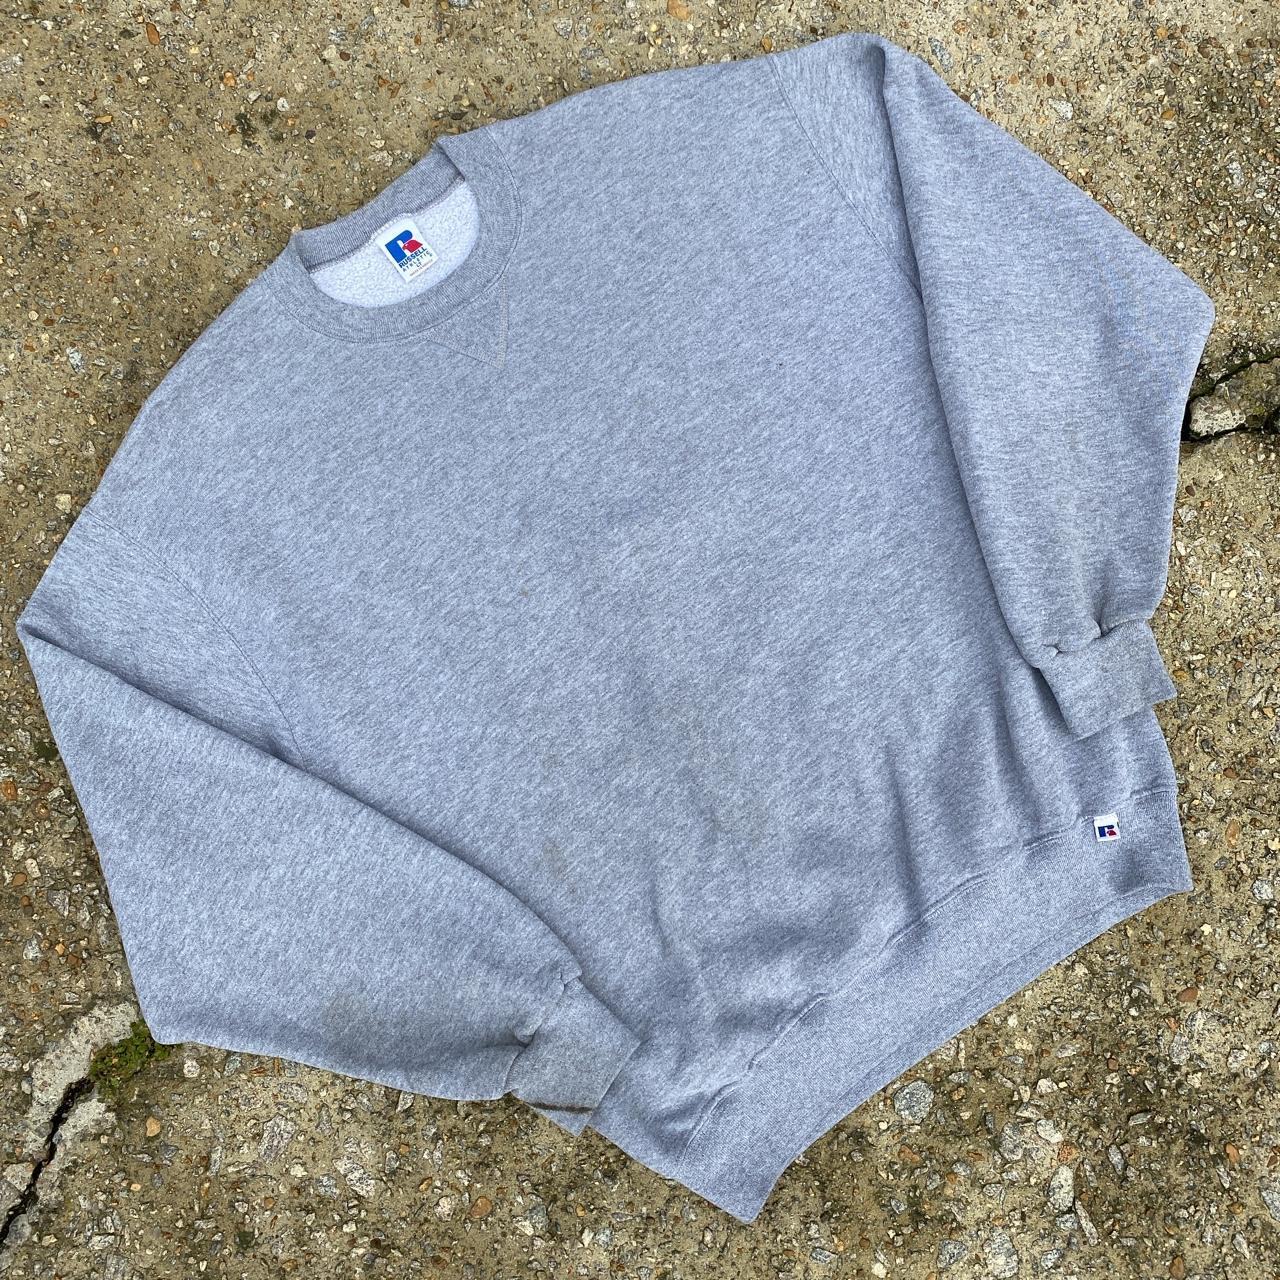 Russell Athletic Men's Grey and White Sweatshirt